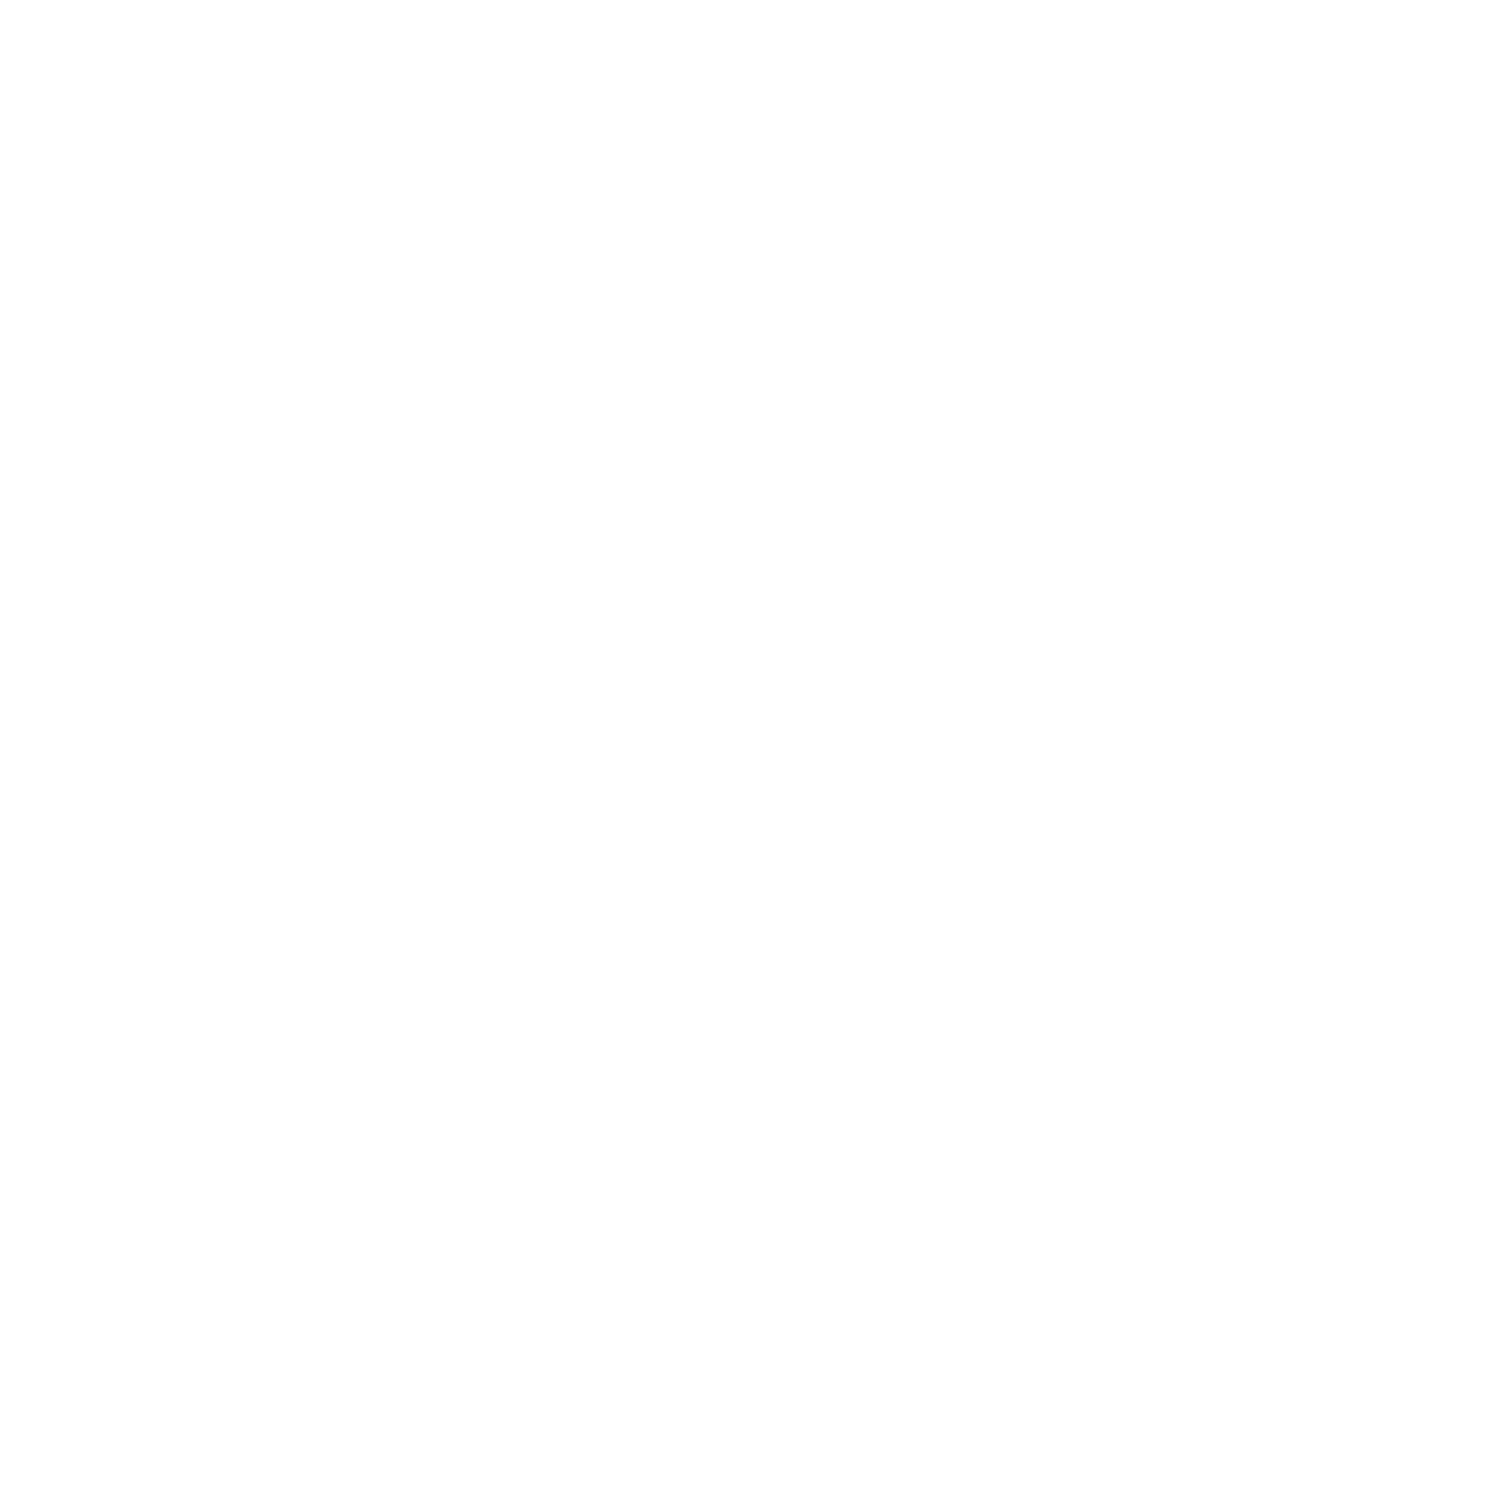 logo for RxLeaf patients is a heart with EKG running through it